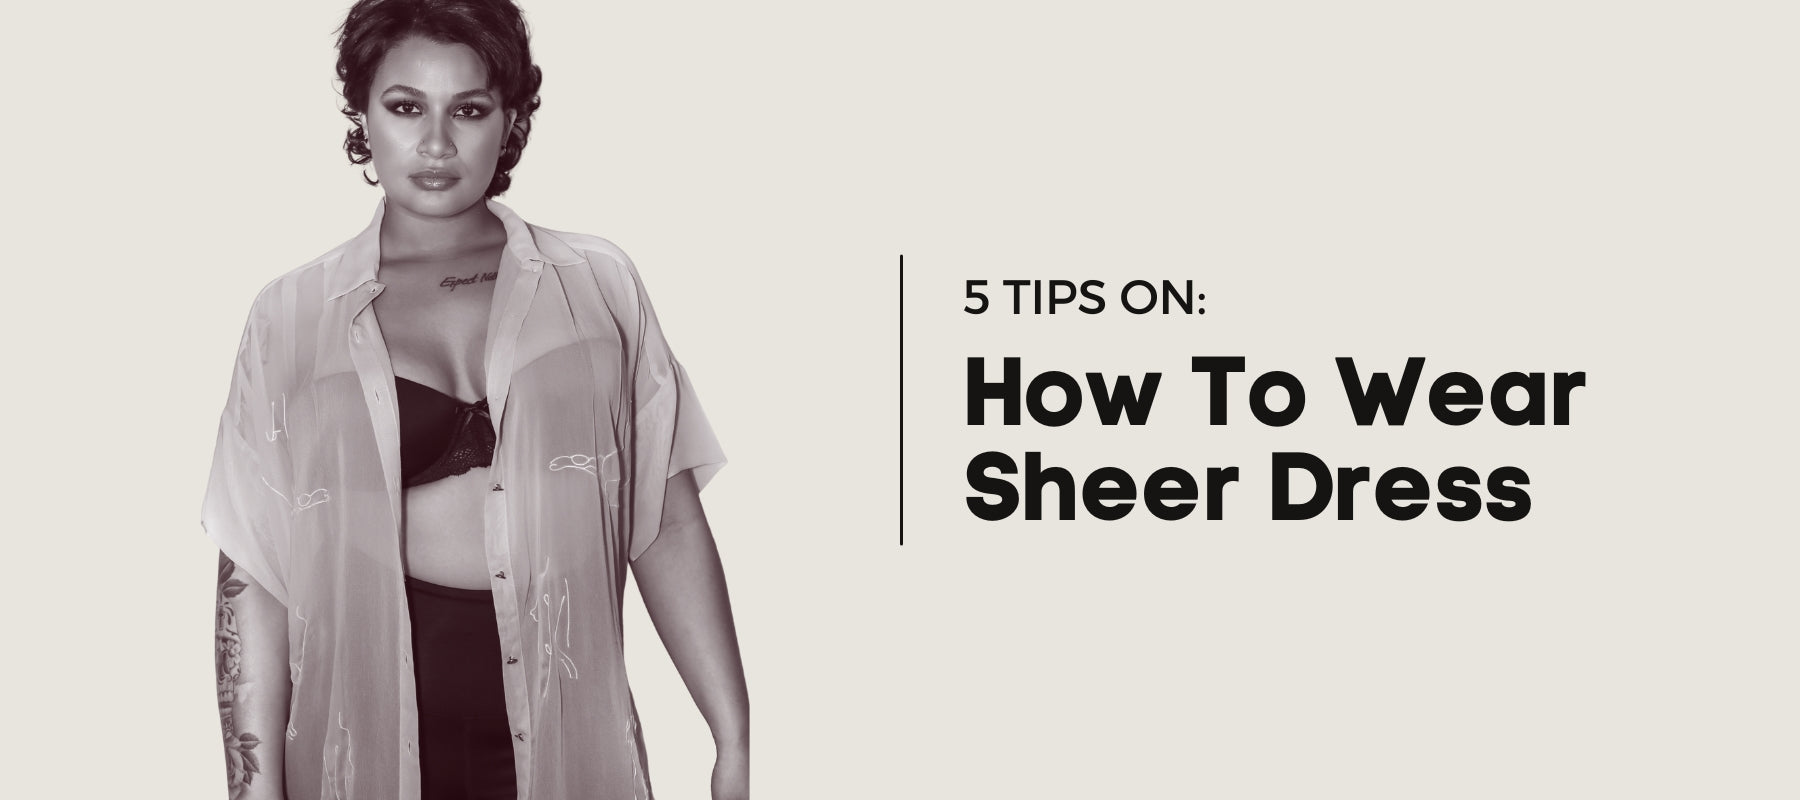 5 TIPS ON: How To Wear A Sheer Dress